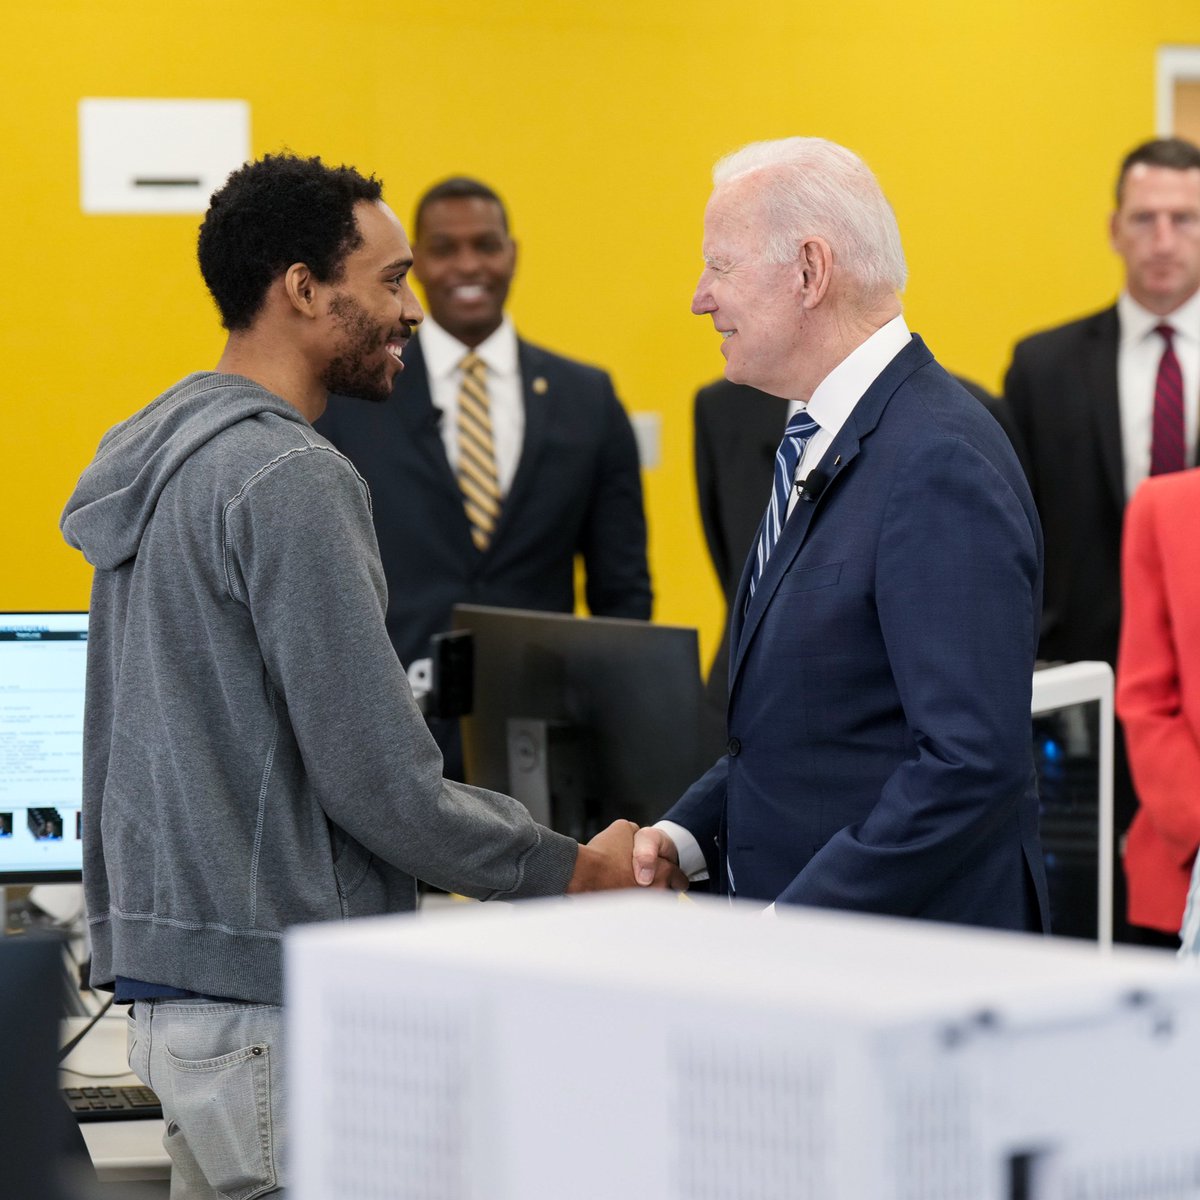 President Biden believes college should be a ticket to the middle class, not a burden that weighs on families. That’s why he announced plans this week to cancel student debt for tens of millions of Americans—totaling debt relief for over 30 million borrowers.